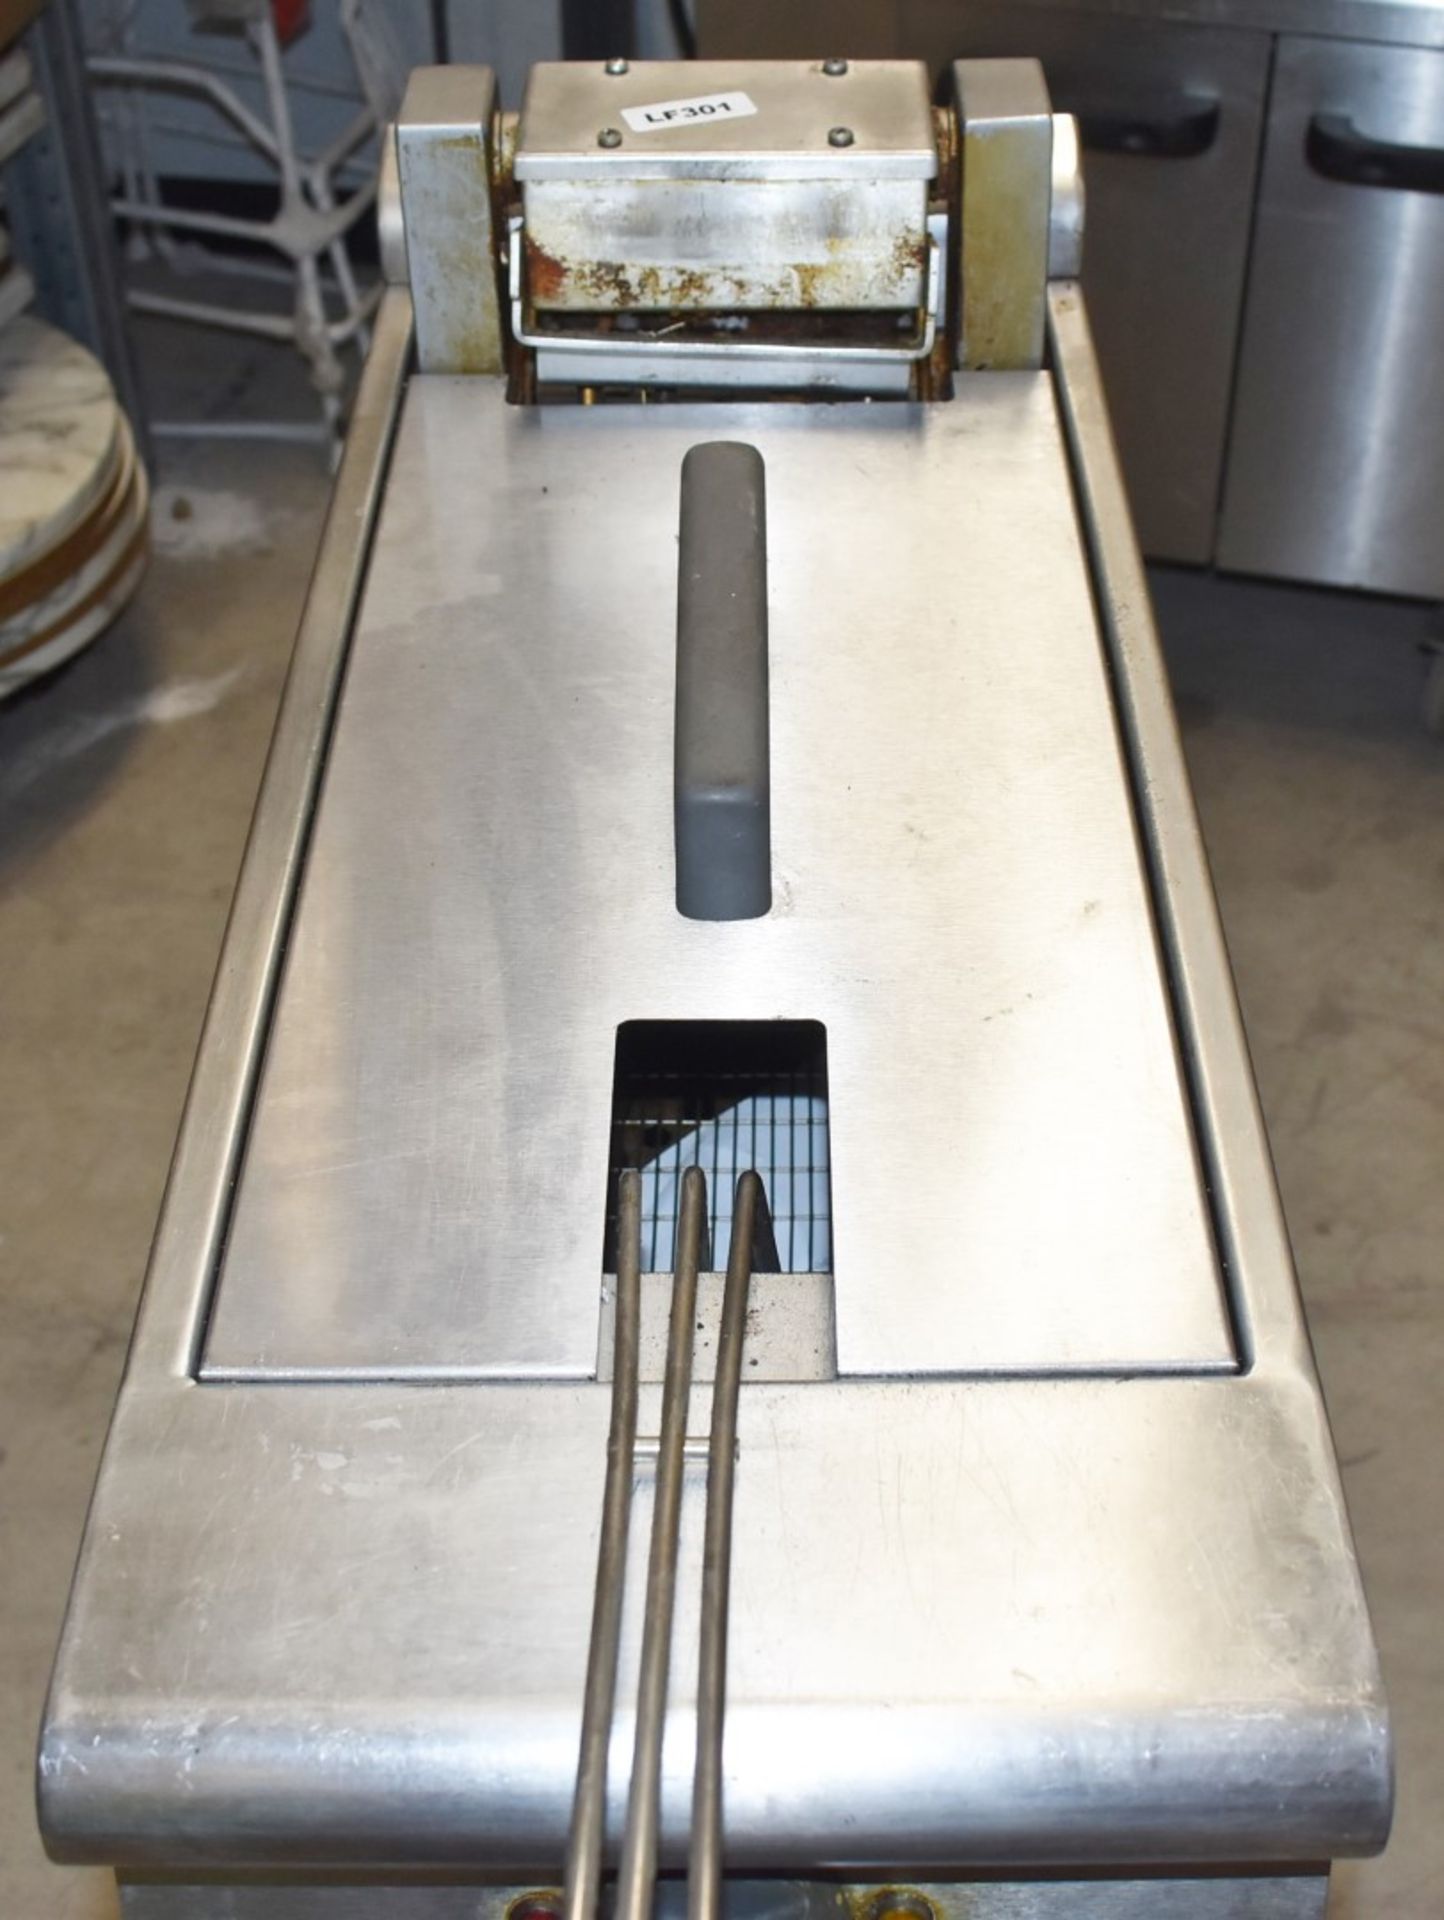 1 x Falcon Single Tank Electric 3 Phase Fryer With Frying Basket - H90 x W30 x D77 cms - CL232 - Ref - Image 2 of 5